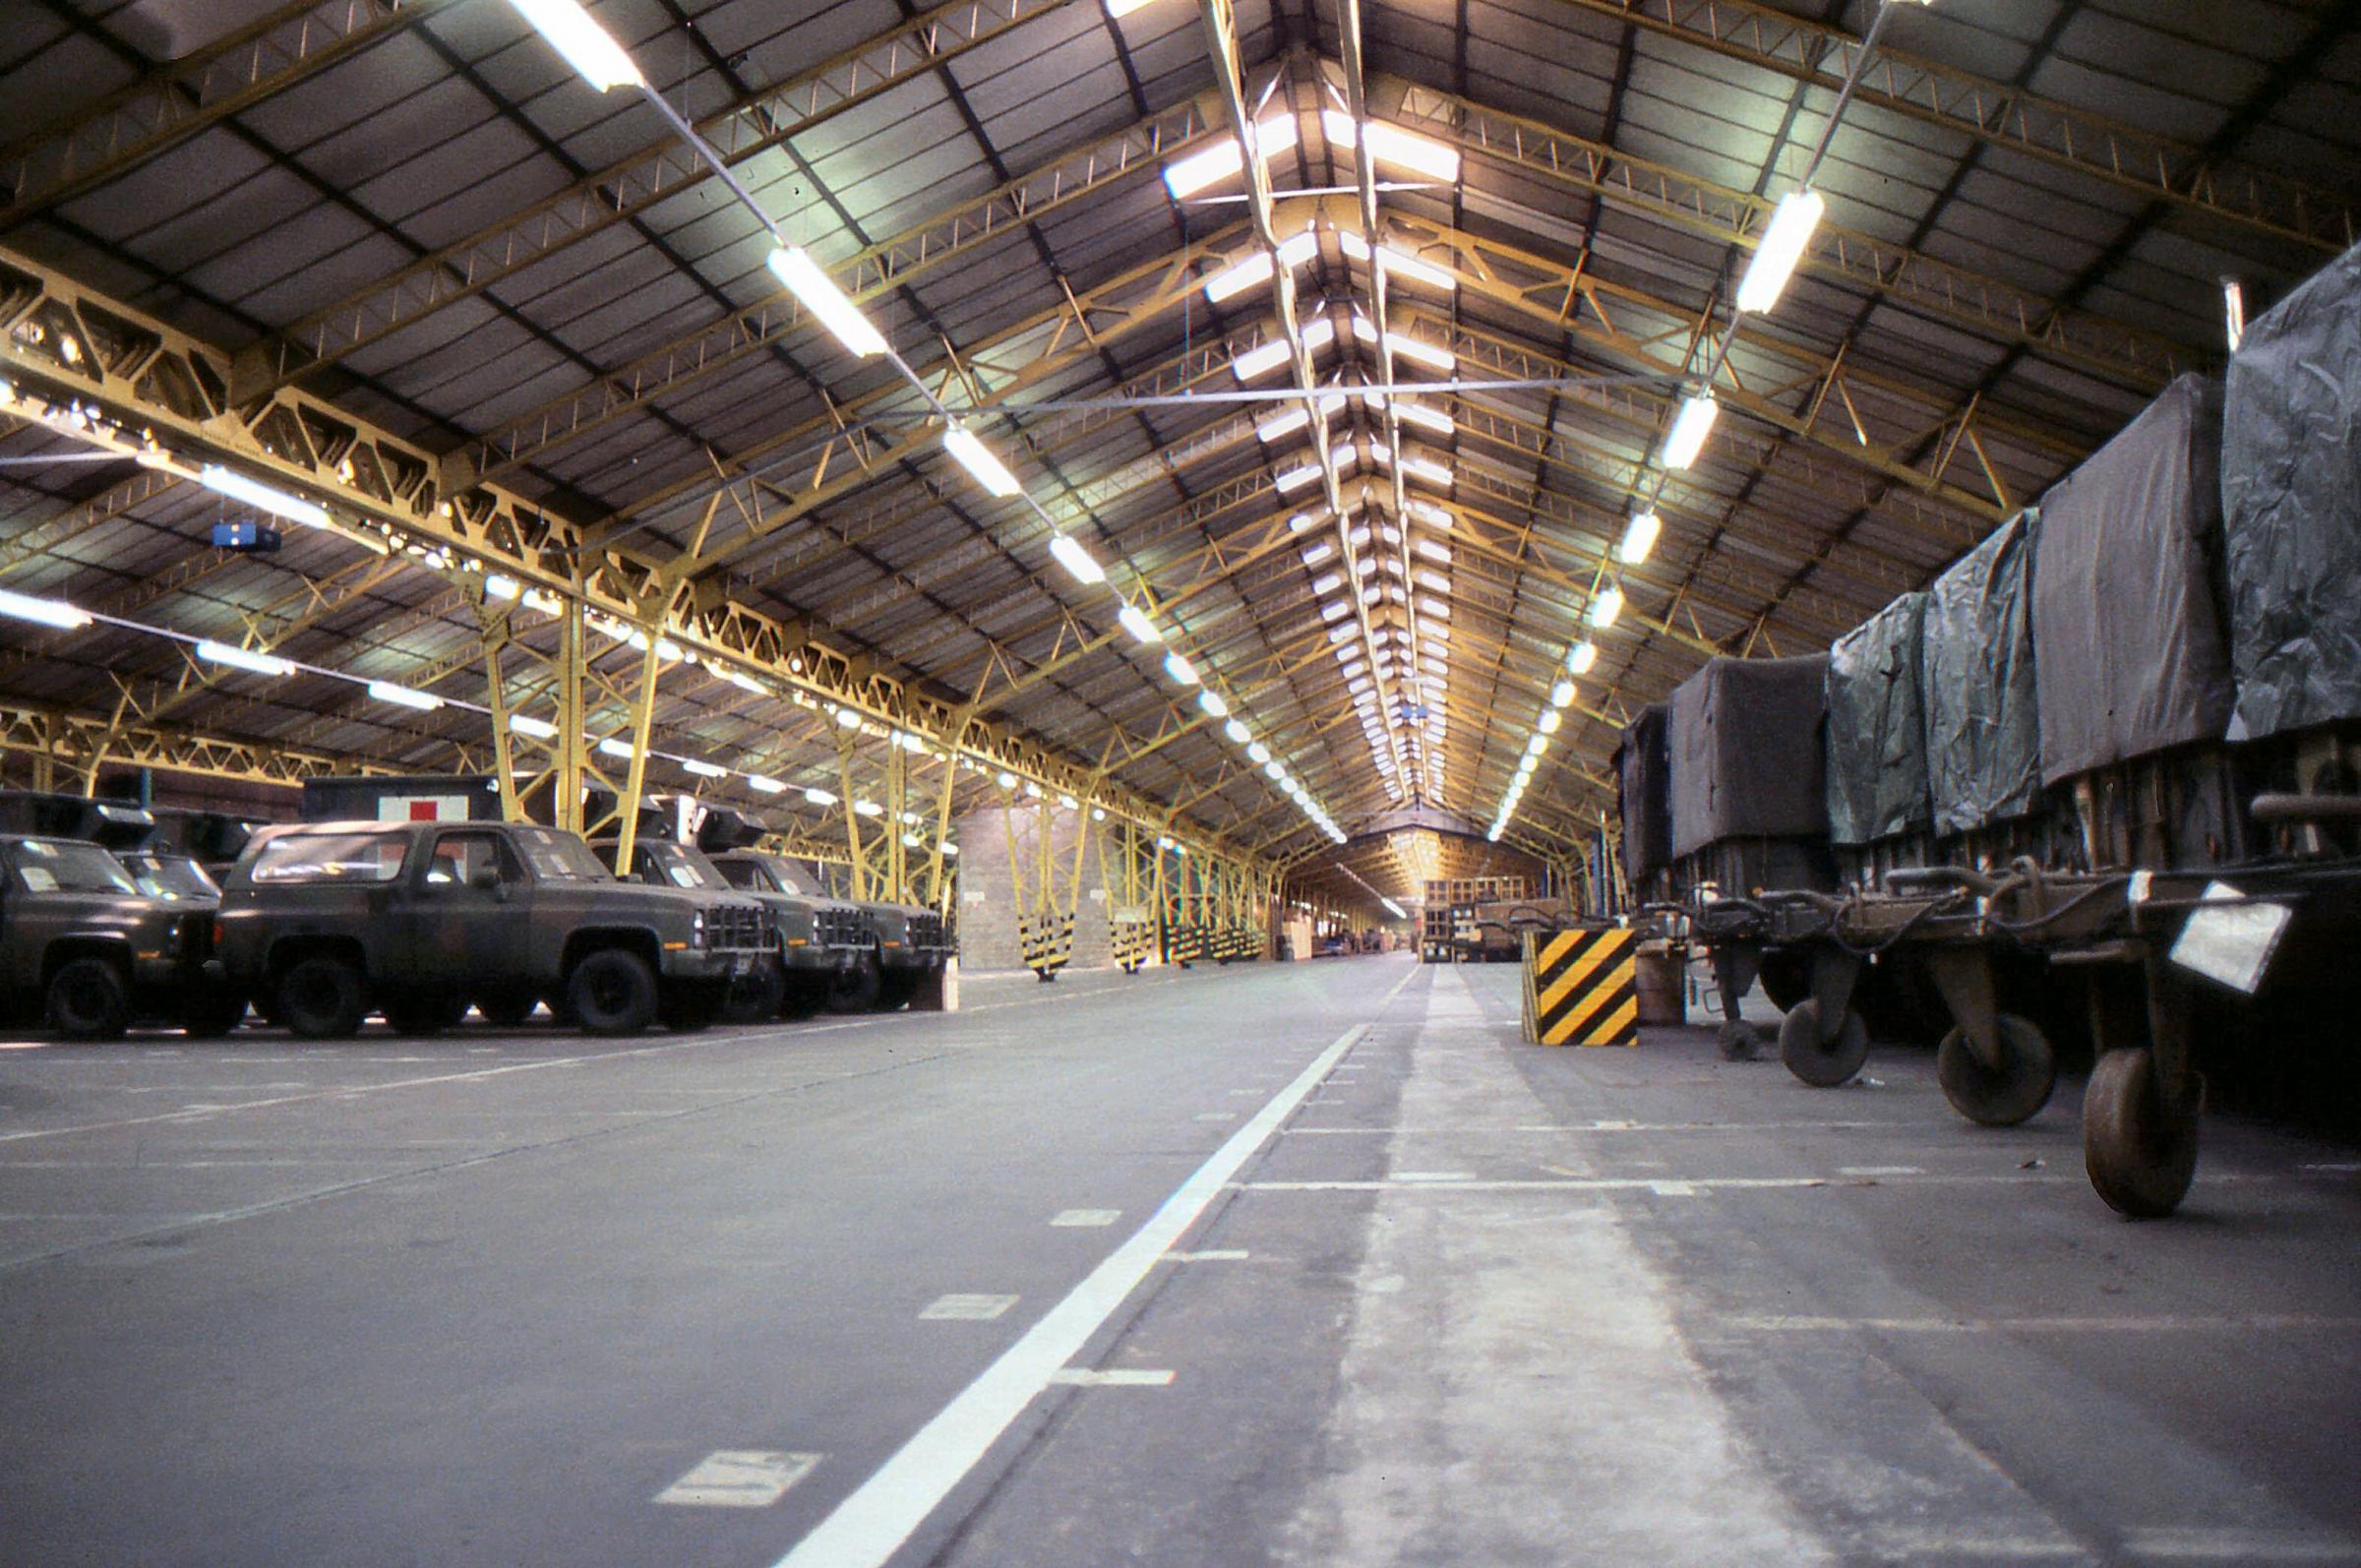 One of the large indoor areas on the airbase